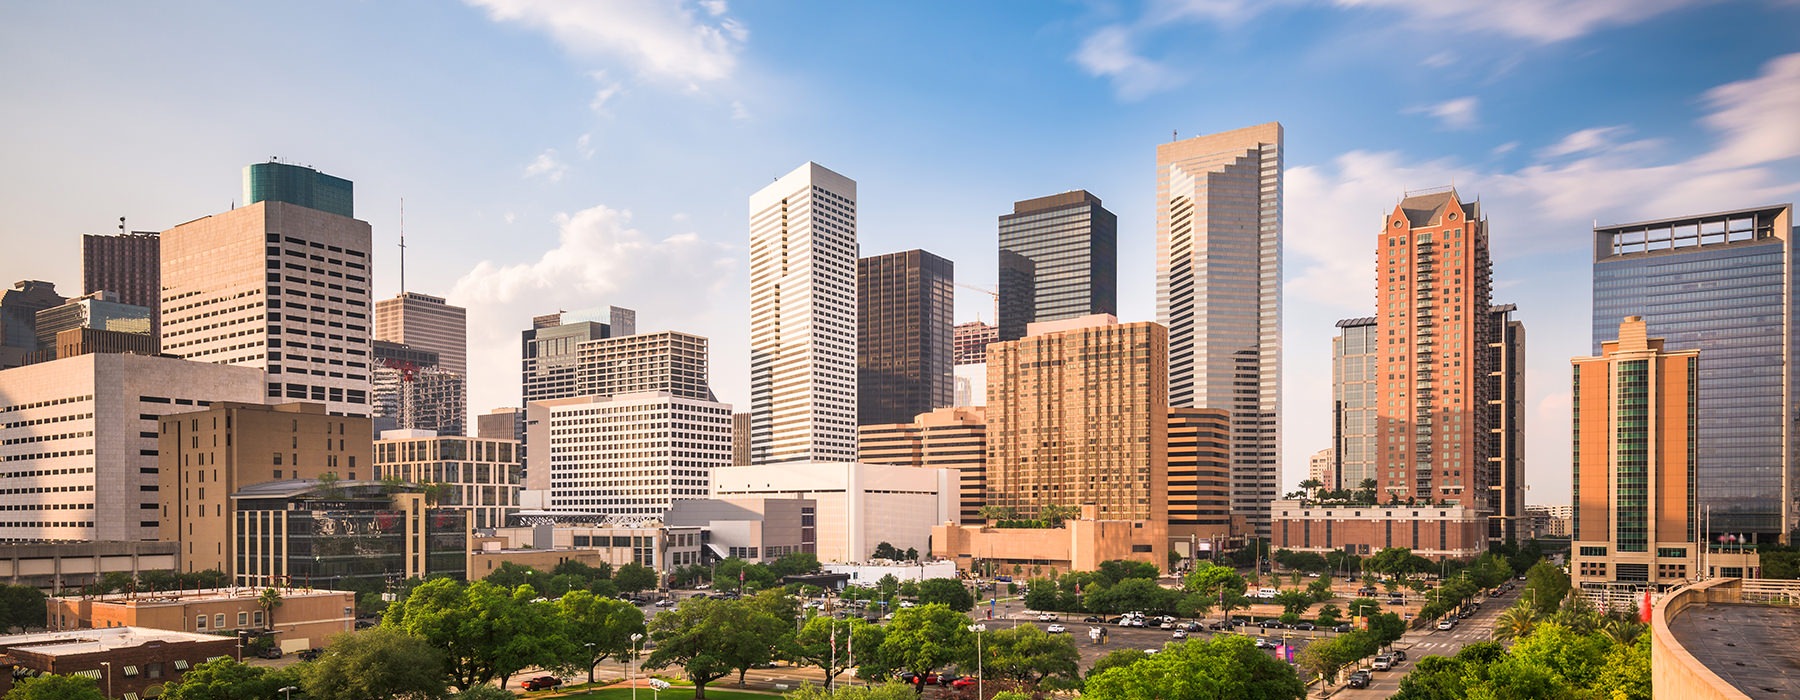 Landscape view of the Houston downtown area 